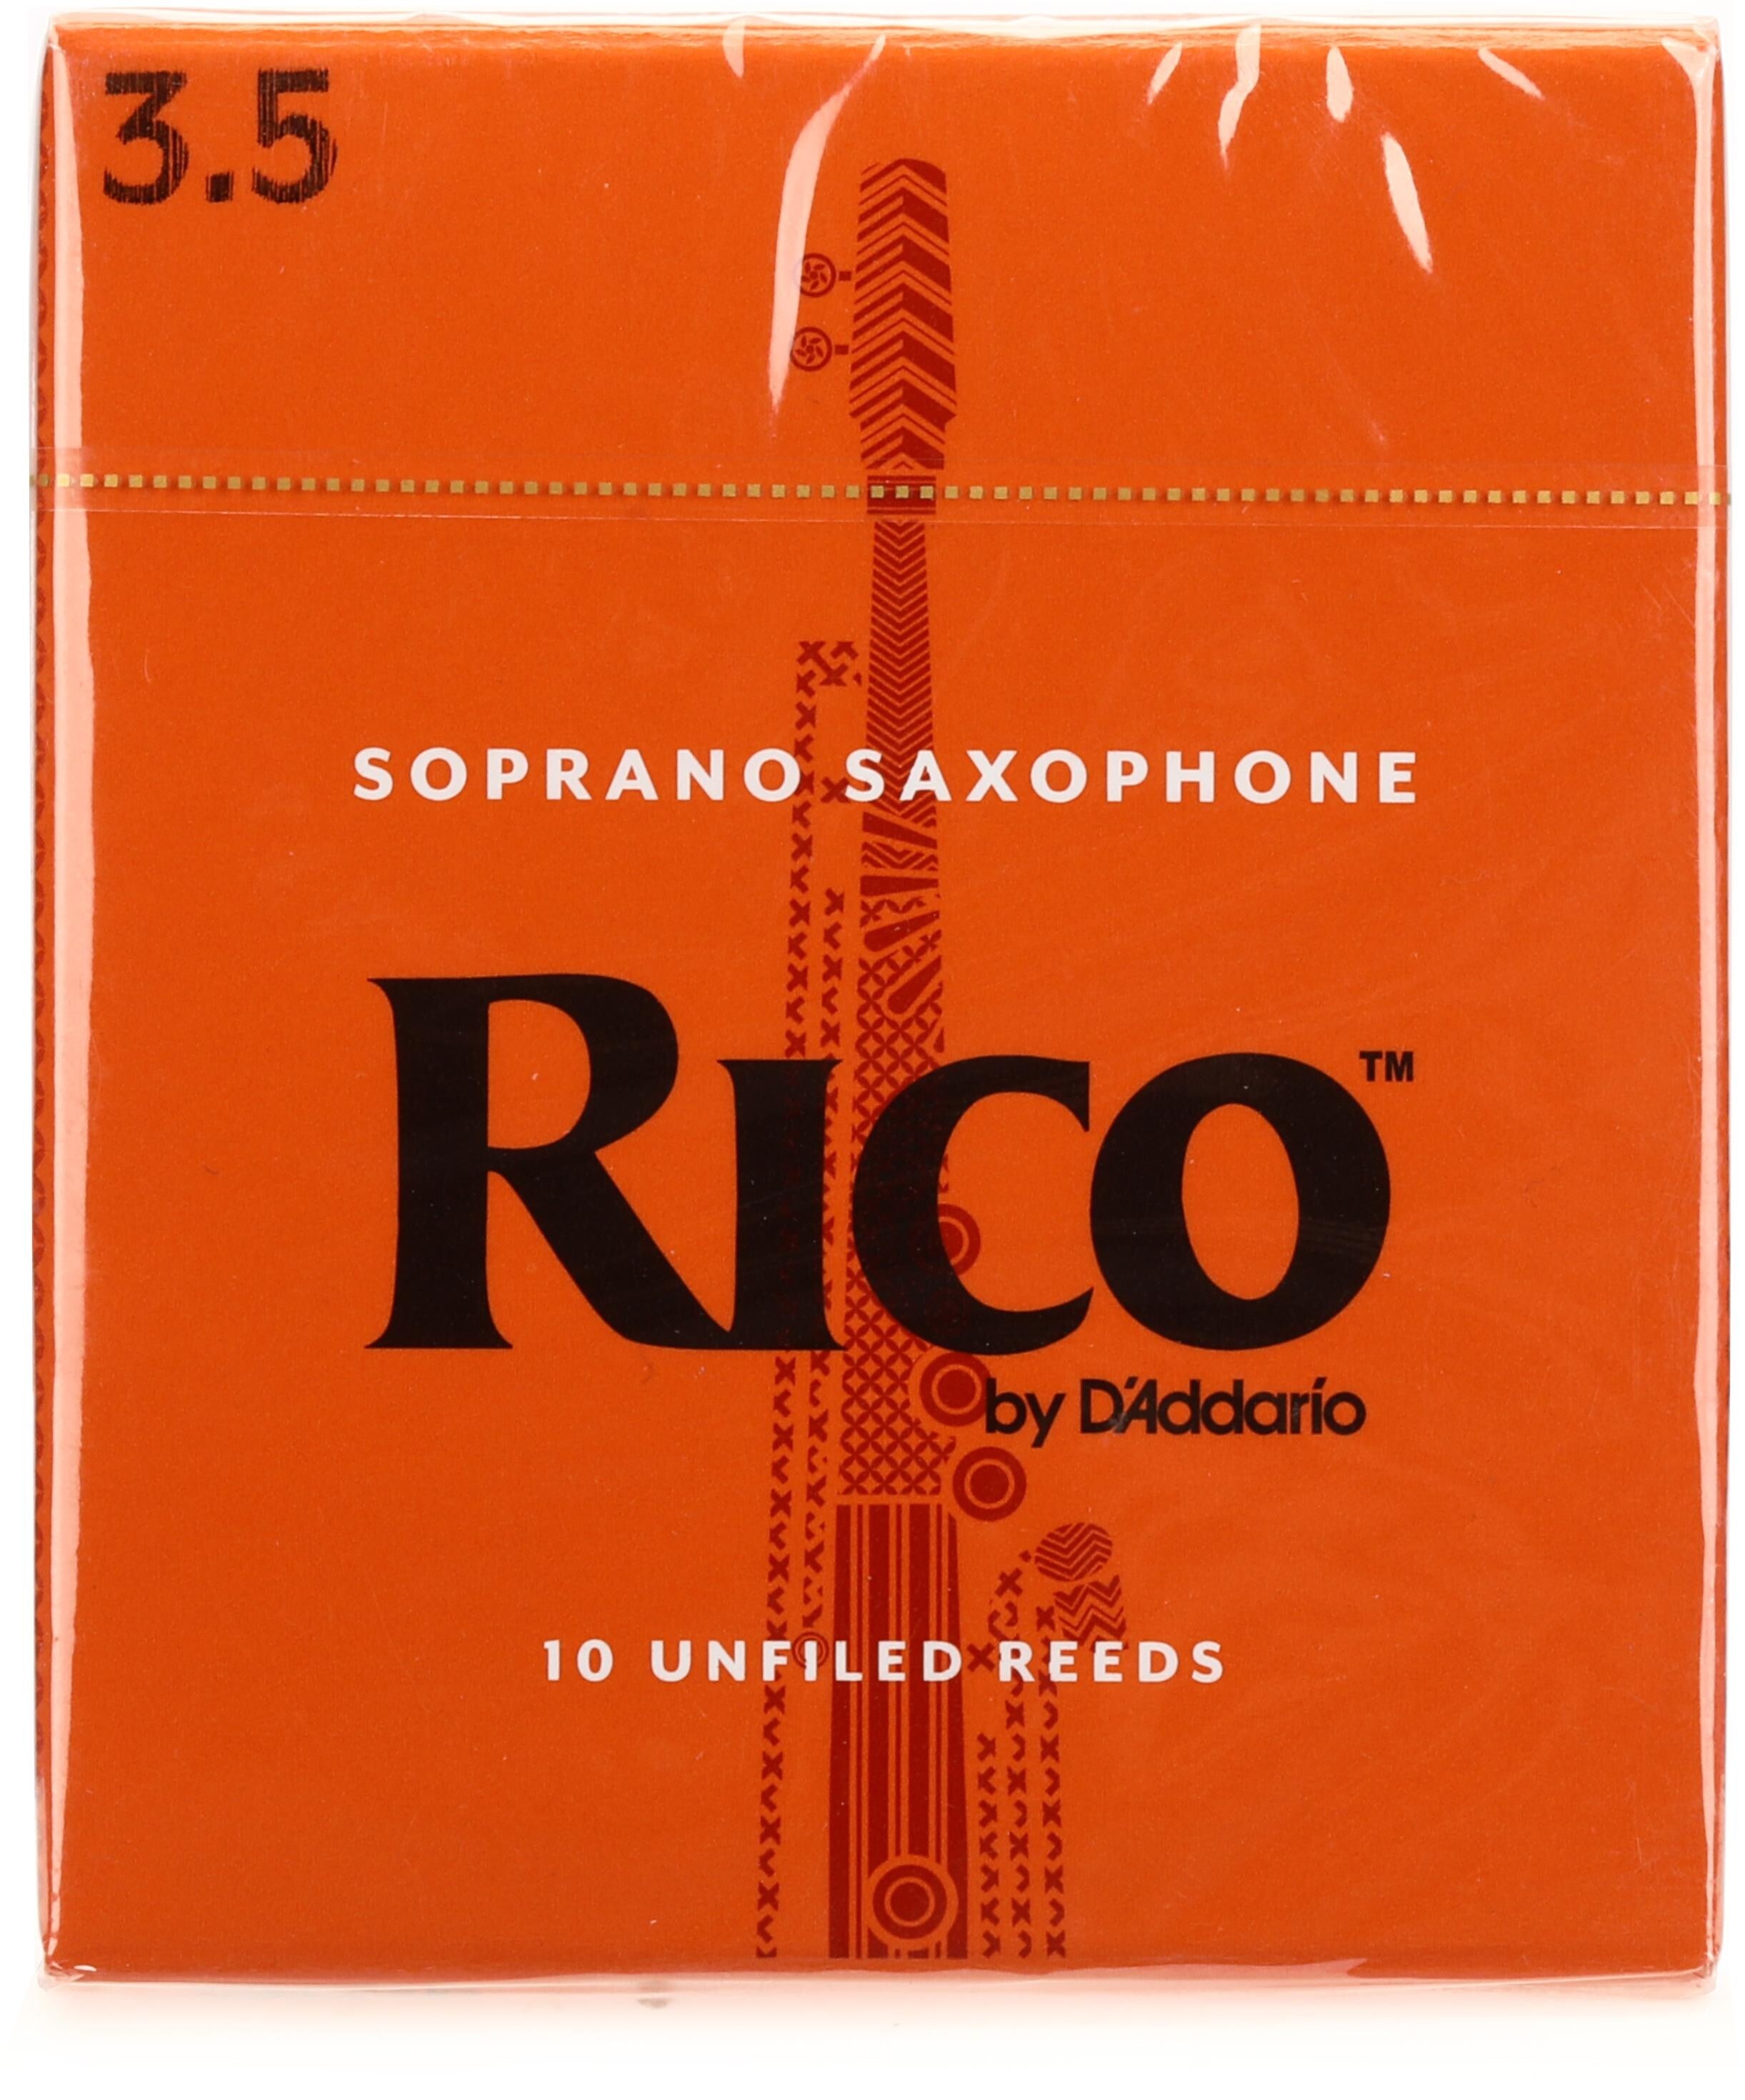 D'Addario Rico Soprano Saxophone Reeds (10-pack) with Reed